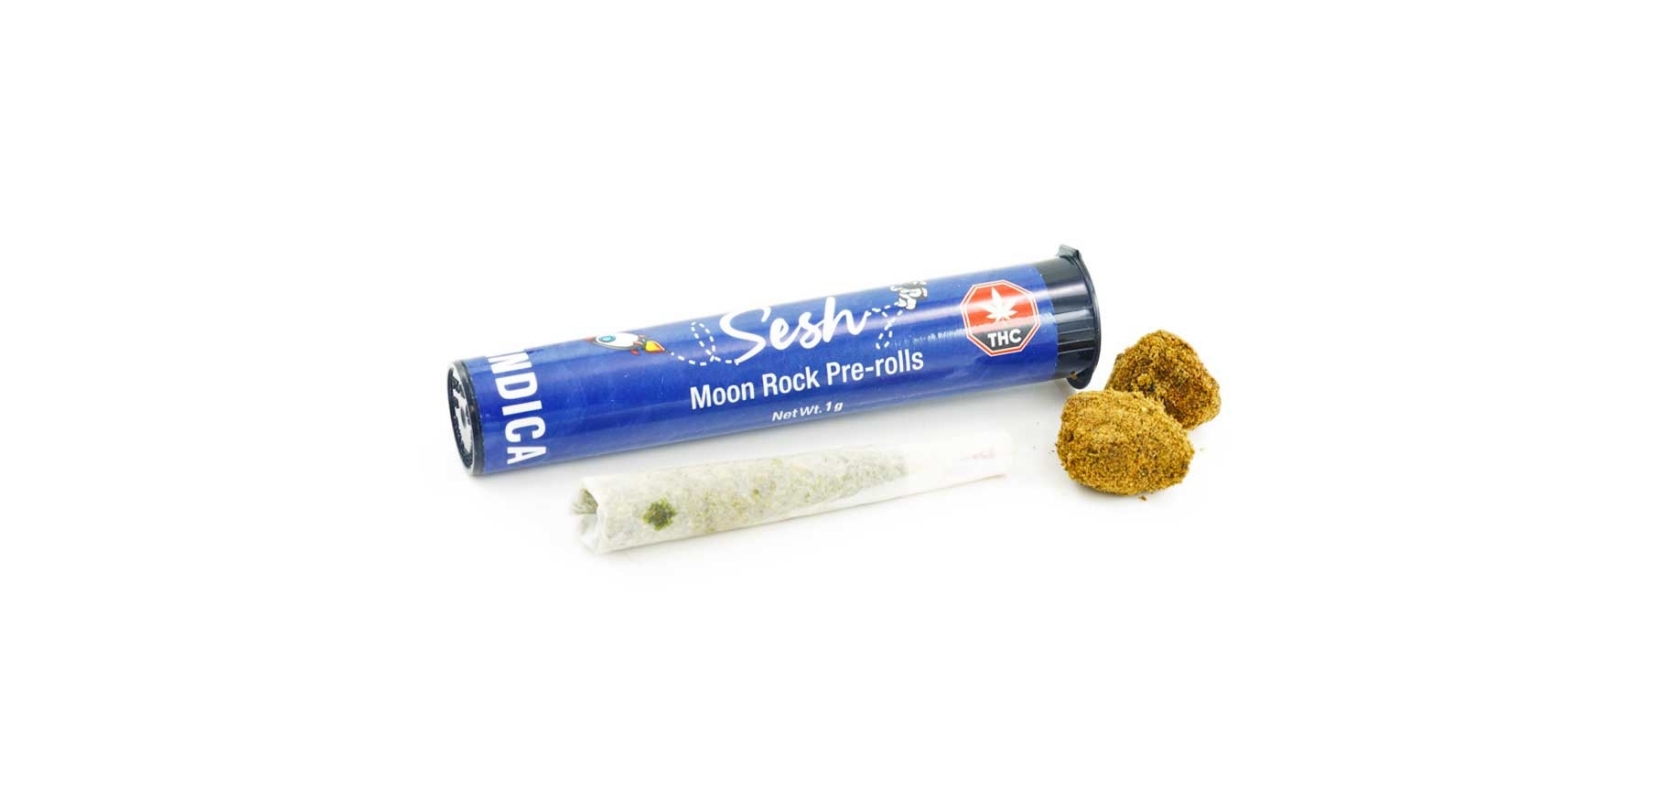 Buy Moon Rock Weed Joints for $20 each from our weed dispensary and you’ll be flying higher than the sun!